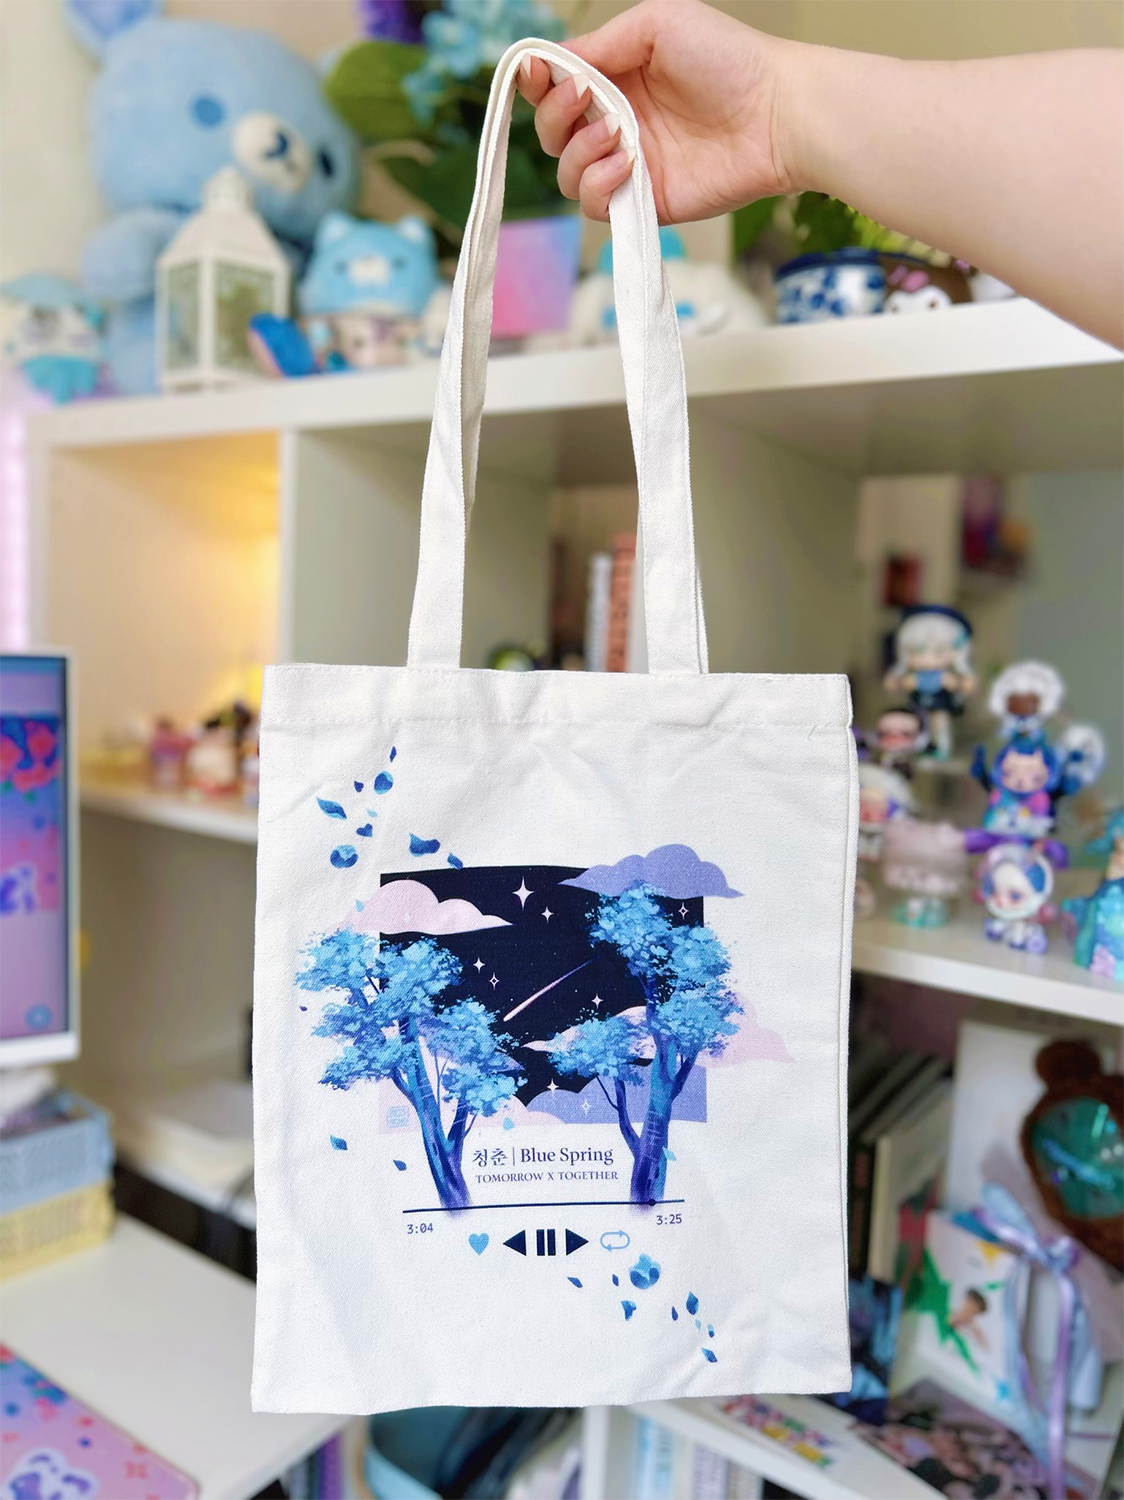 A high quality canvas tote bag in honor of Tomorrow x Together's song Blue Spring from their ACT: Sweet Mirage tour Kpop